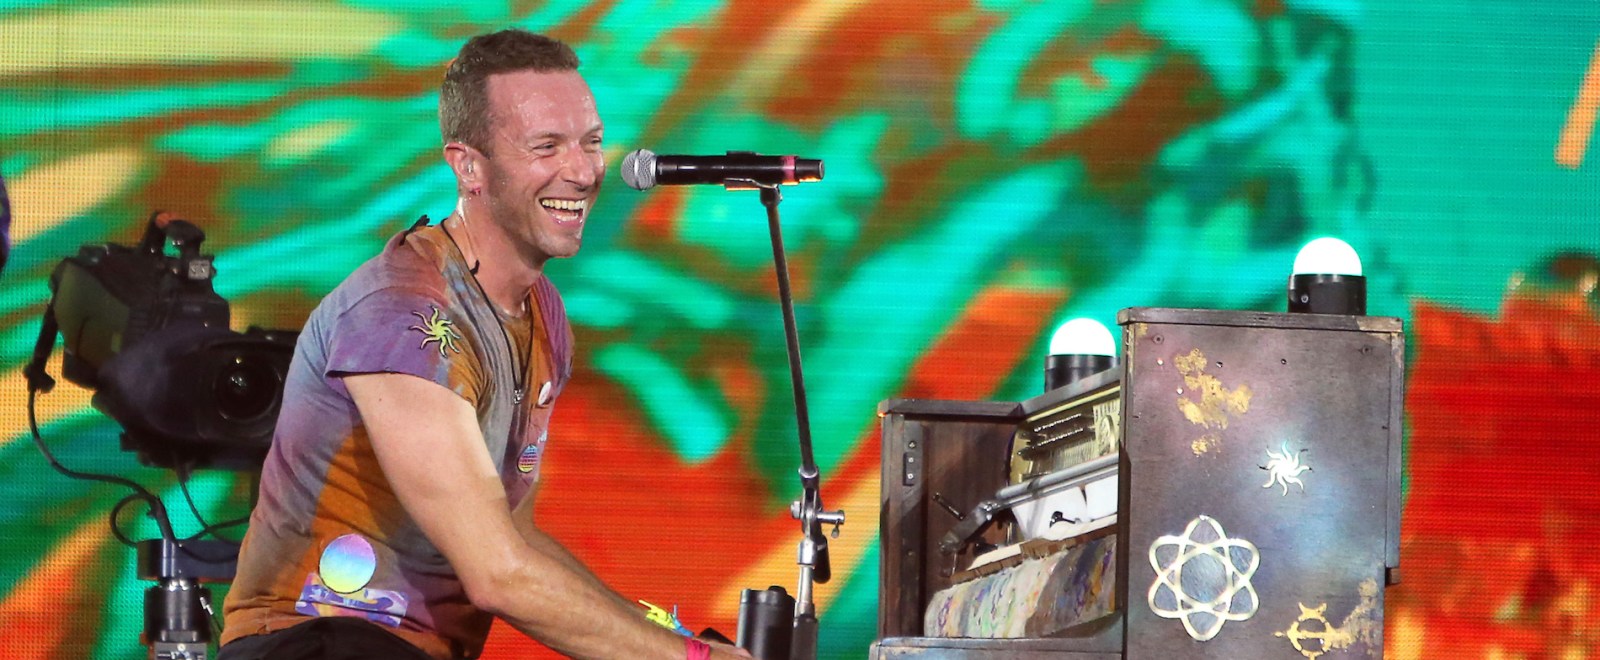 Chris Martin Coldplay Music Of The Spheres tour Wembley Stadium 2022